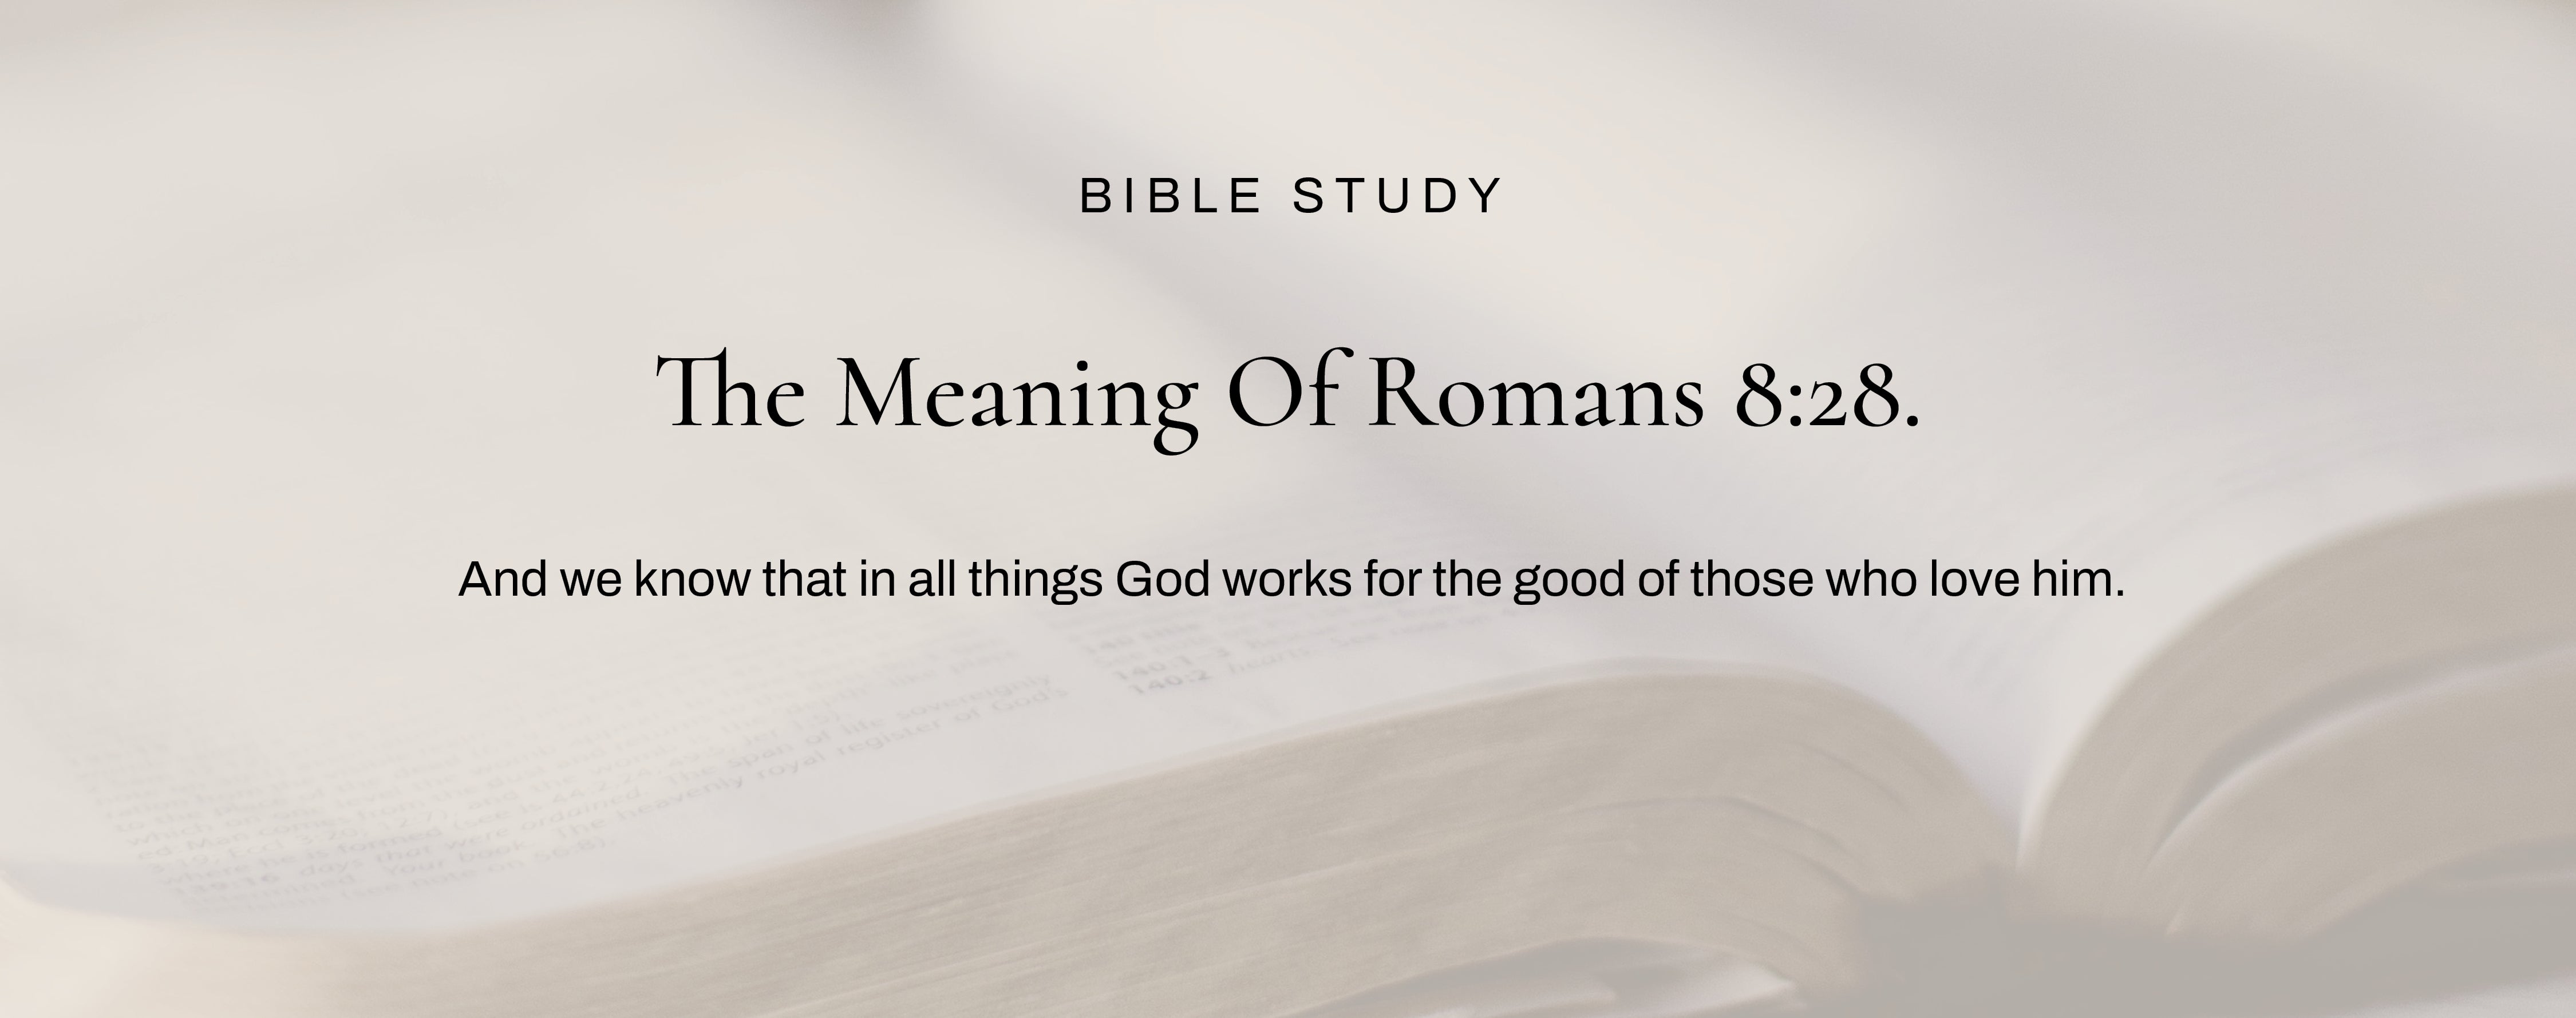 What Does Romans 8:28 Mean?